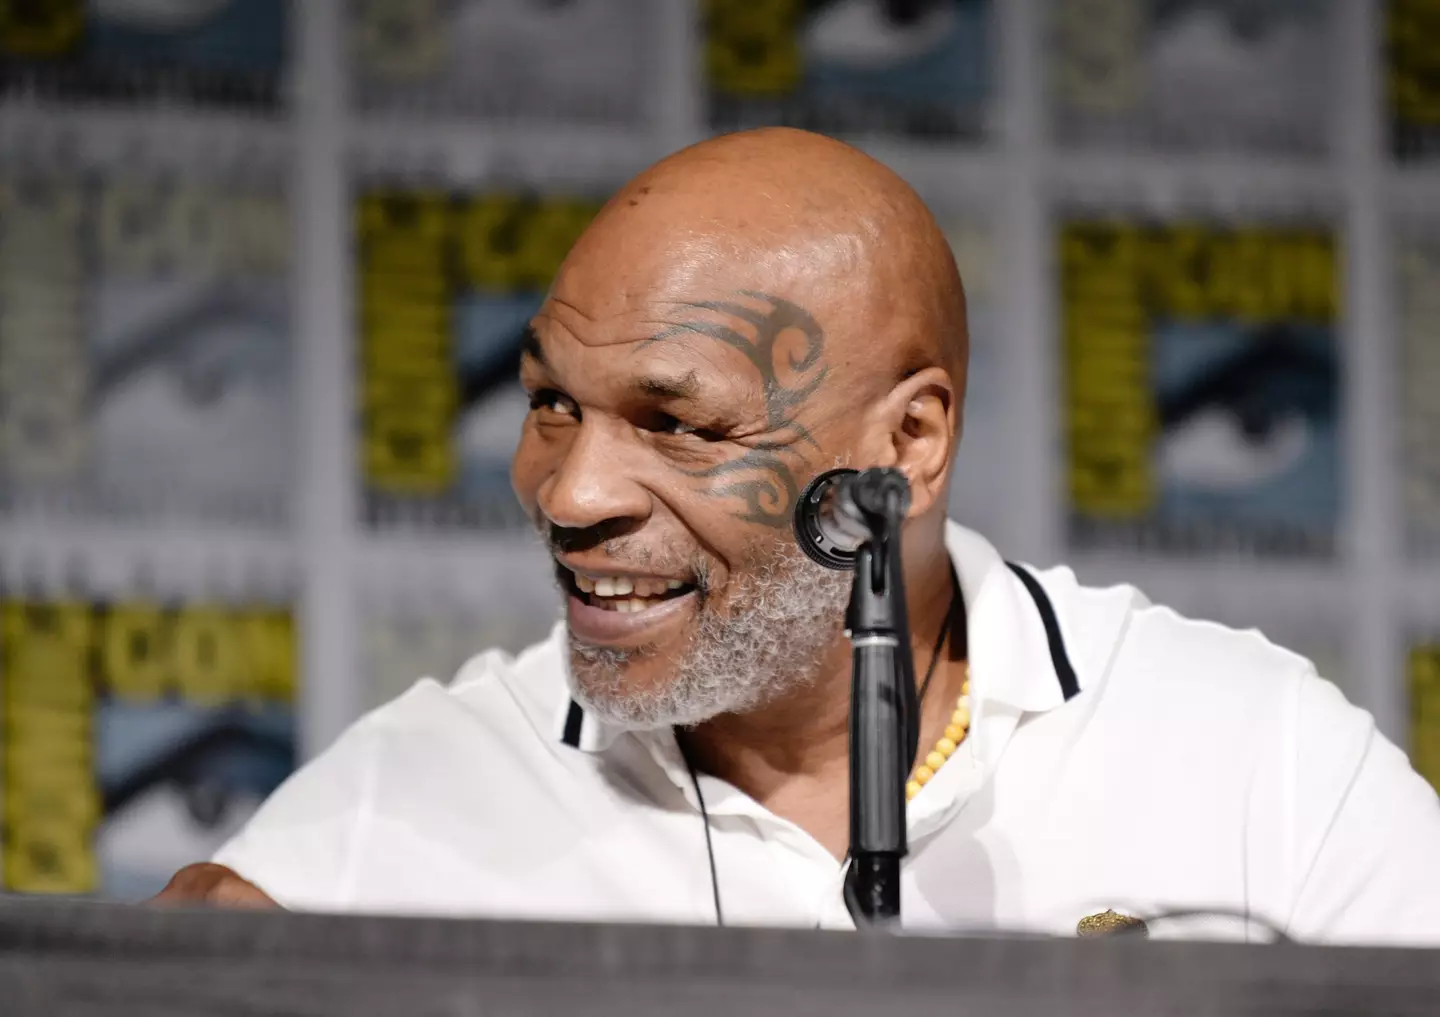 Mike Tyson will need to undergo tests before his fight with Jake Paul (Getty)